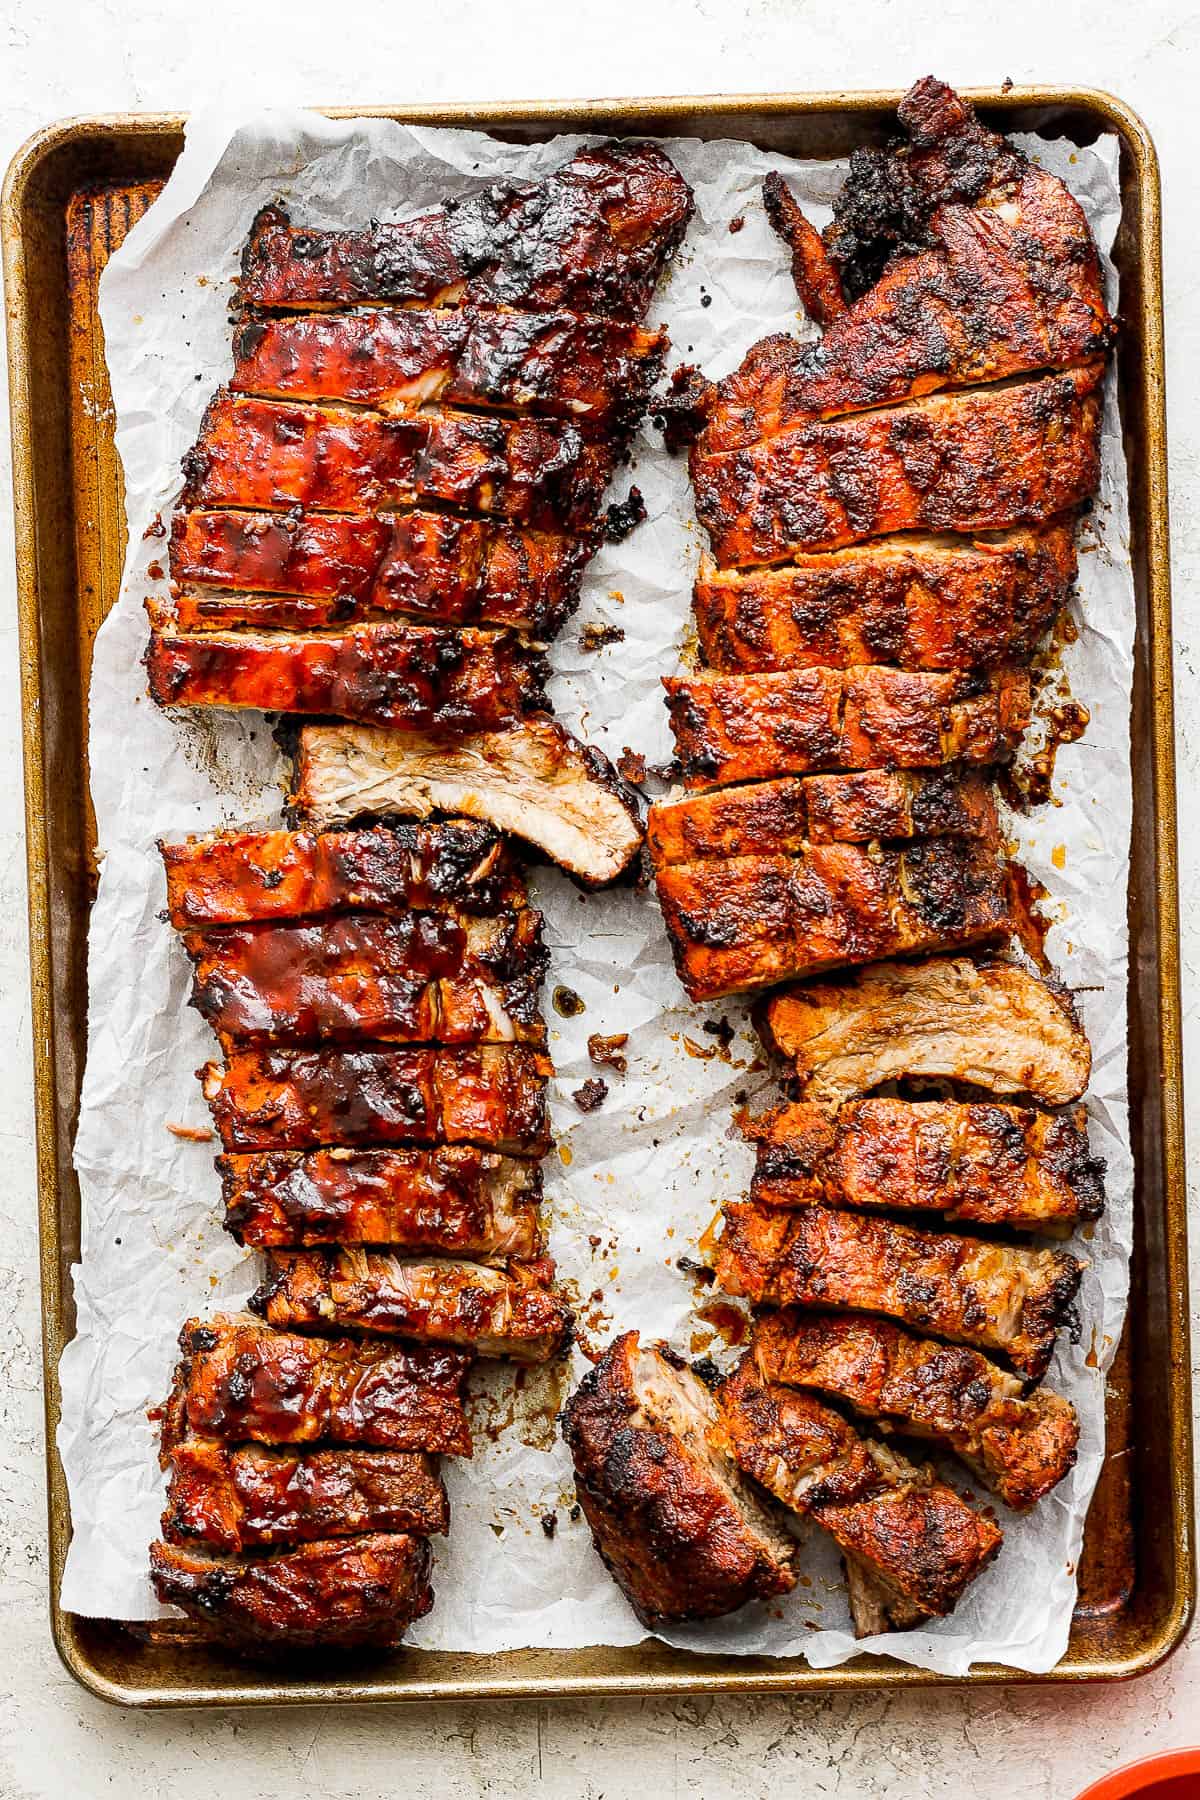 The best recipe for making ribs on the grill.